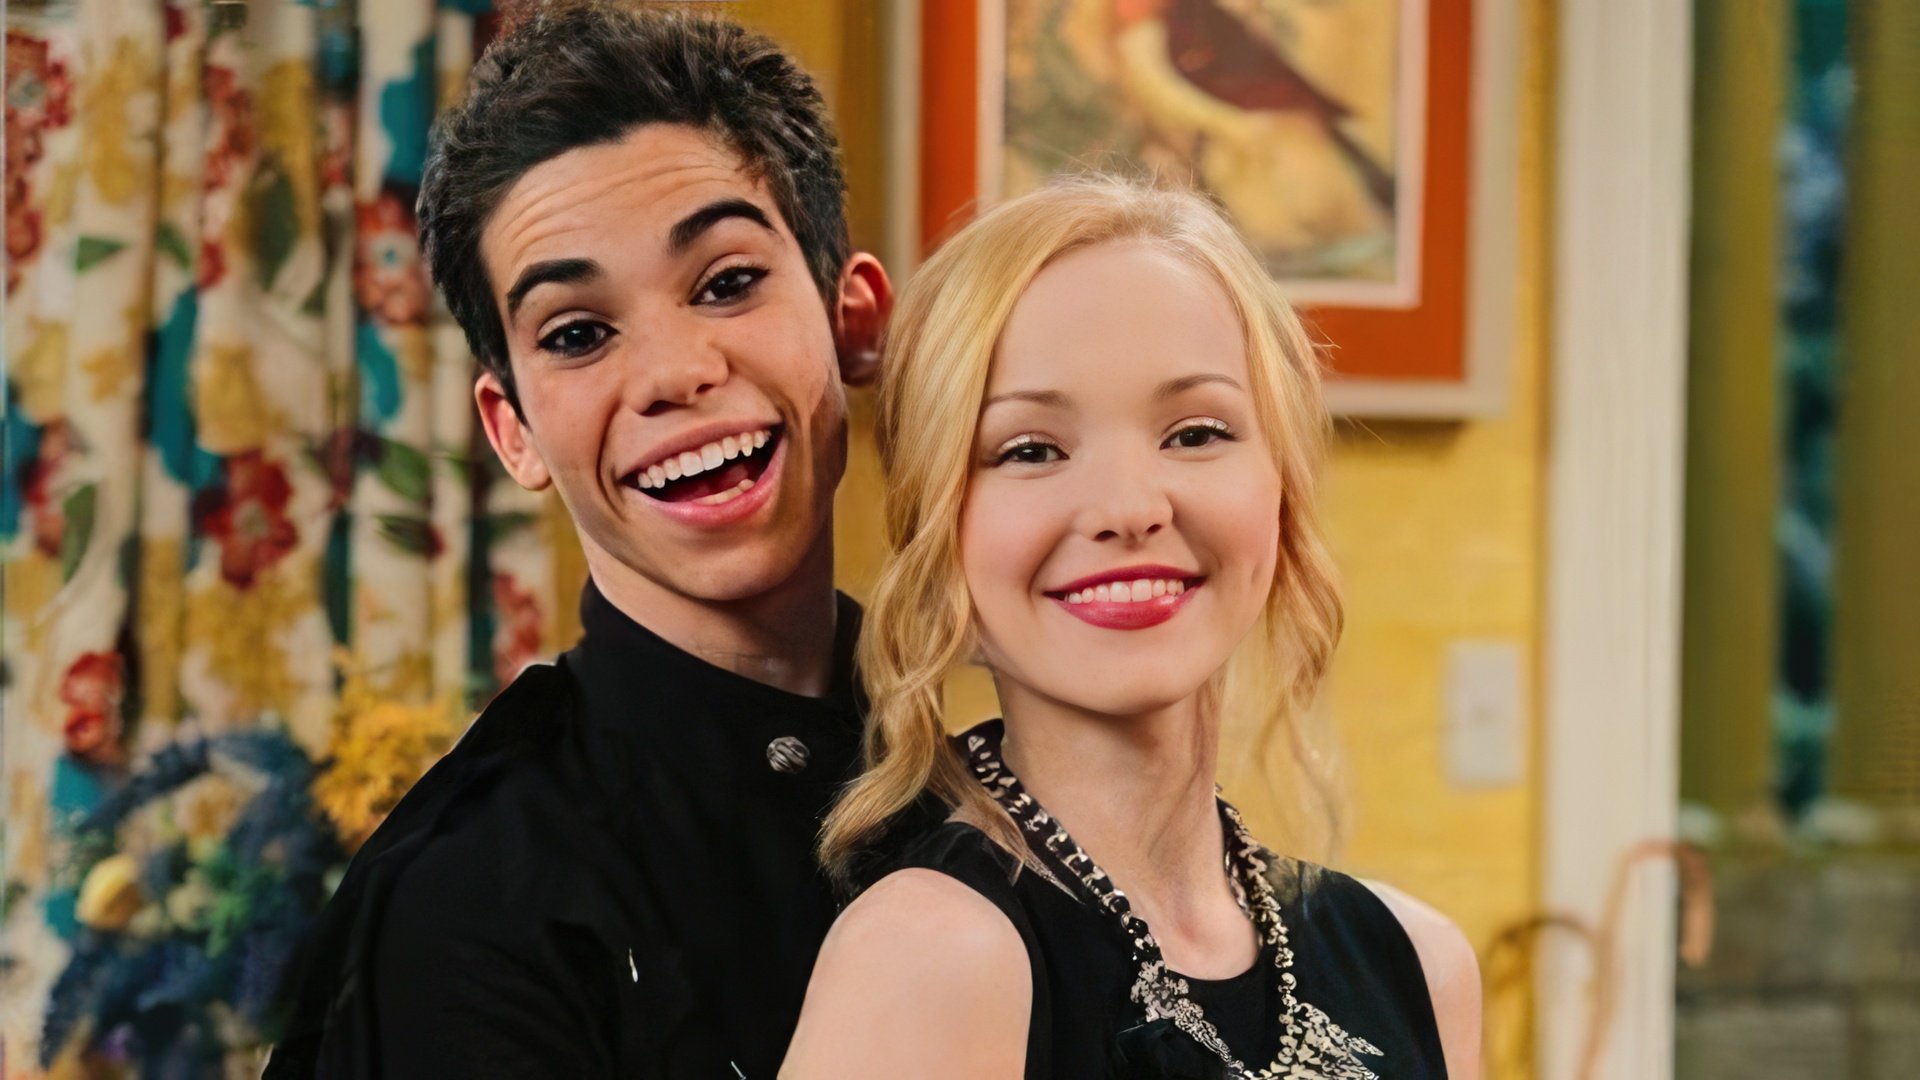 Dove Cameron and Cameron Boyce - not brother and sister